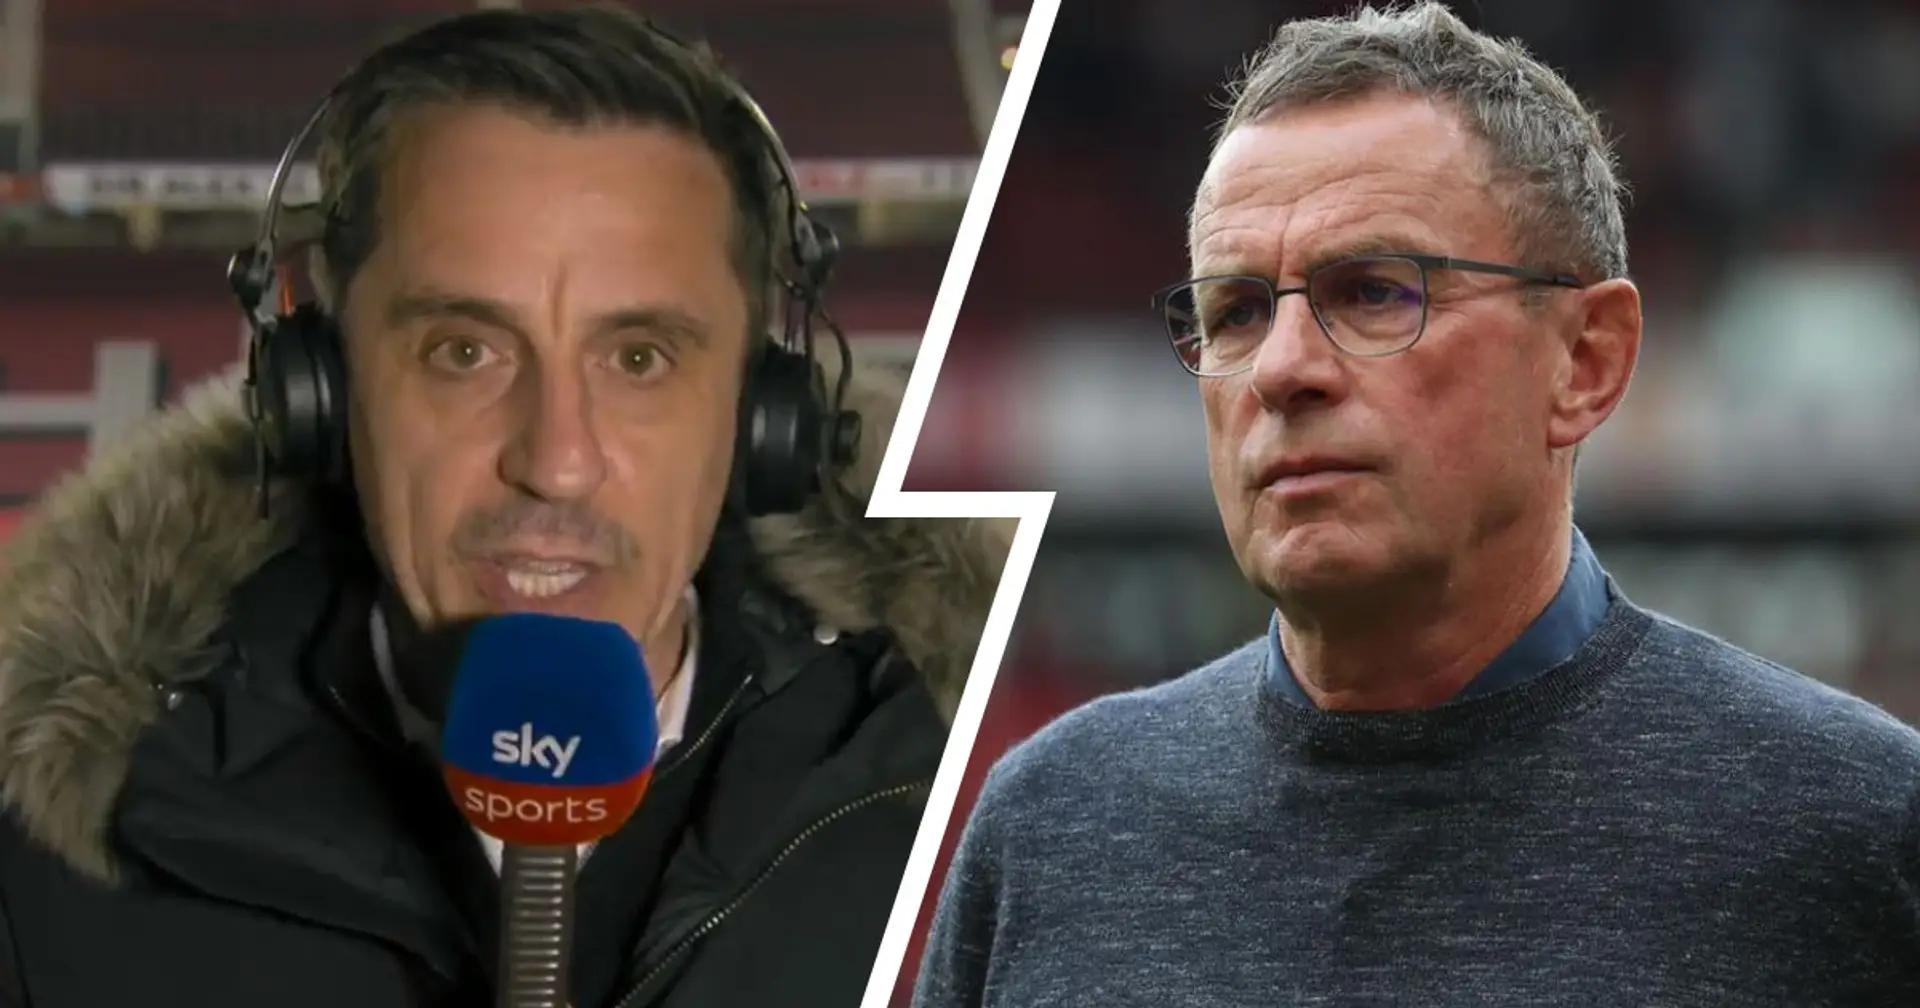 'Where is the priority?': Gary Neville questions Rangnick's decision to take both Austria and United roles